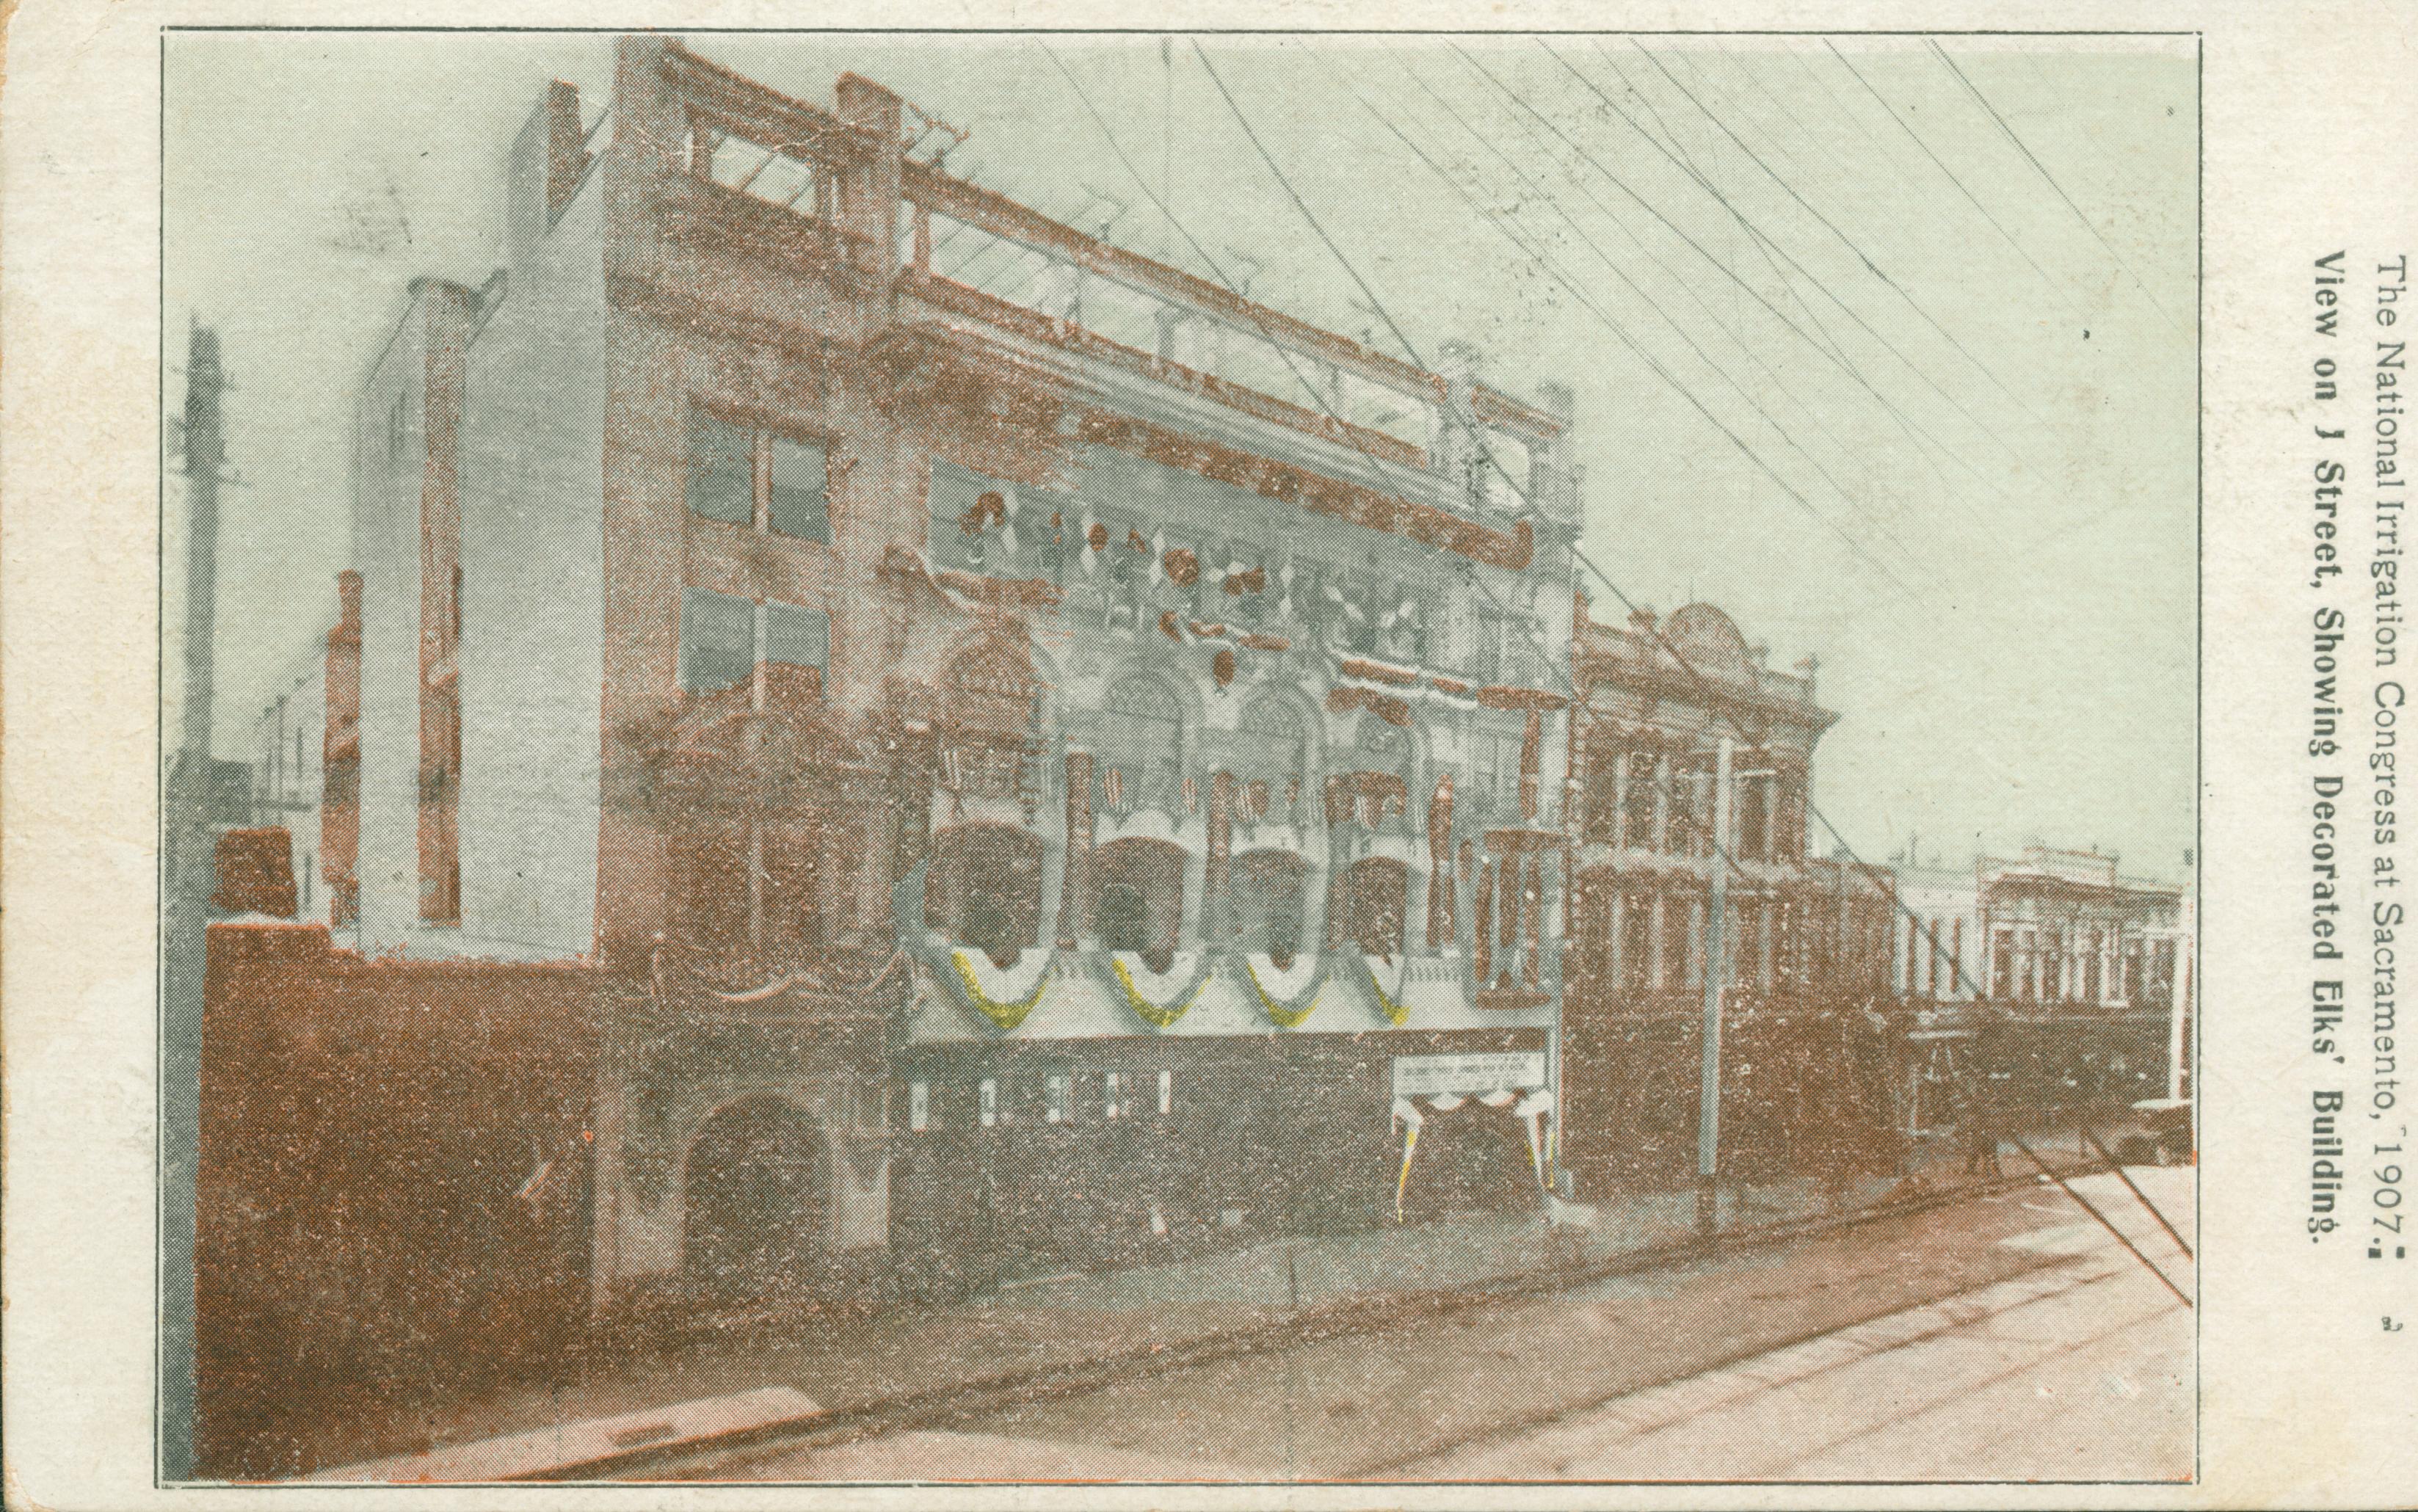 This postcard shows the front façade of the Elks' building in Sacramento.